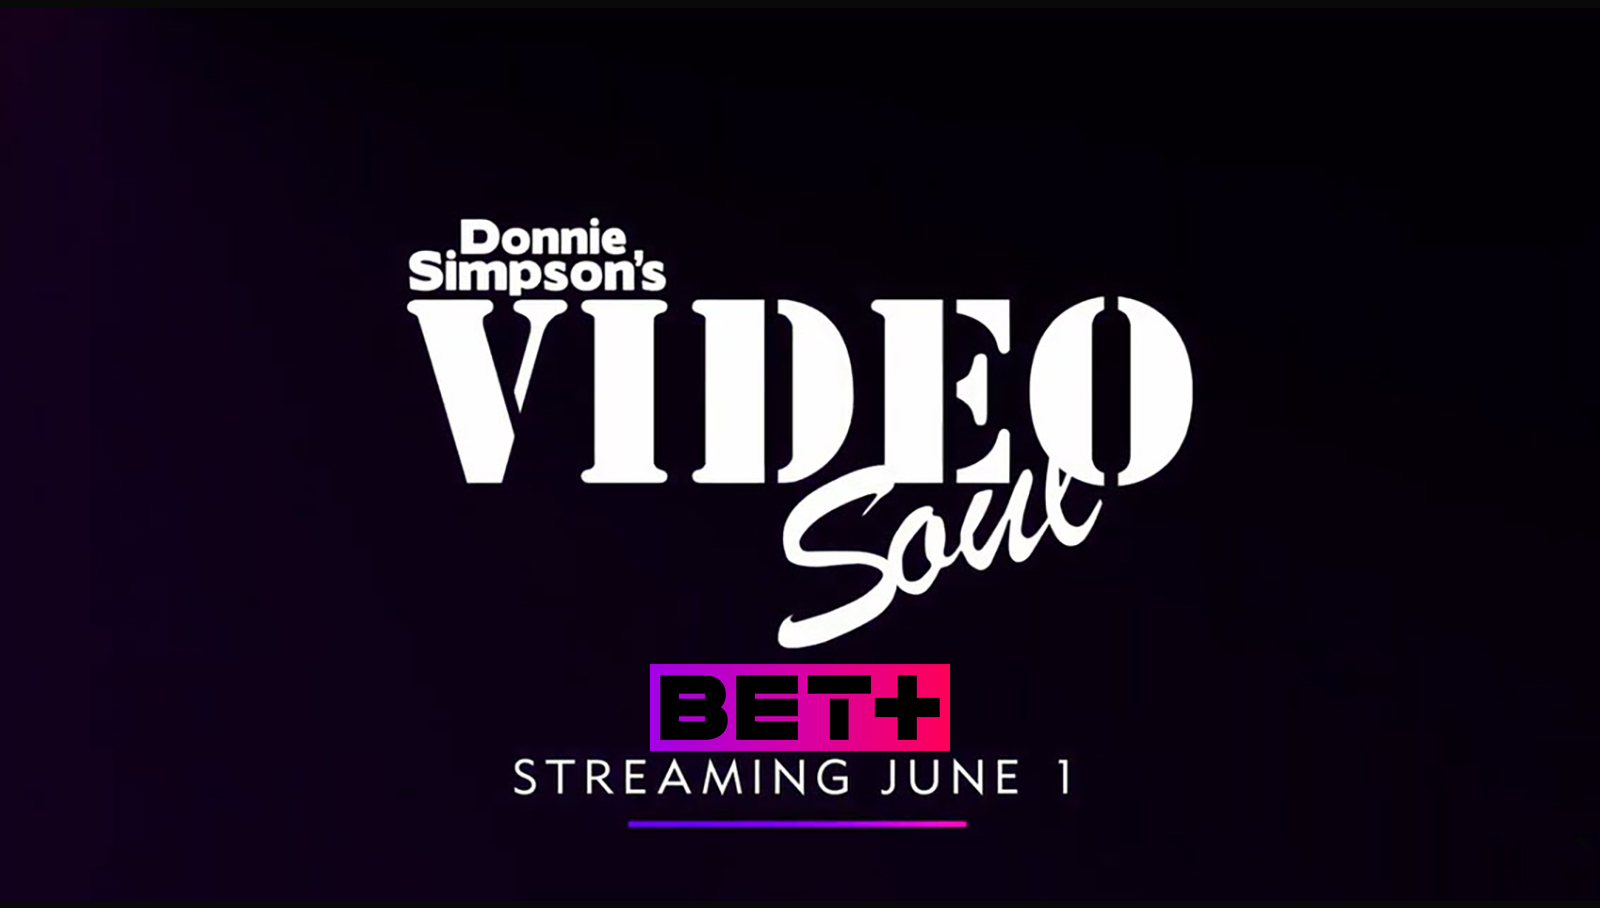 DSVS Streaming on BET+